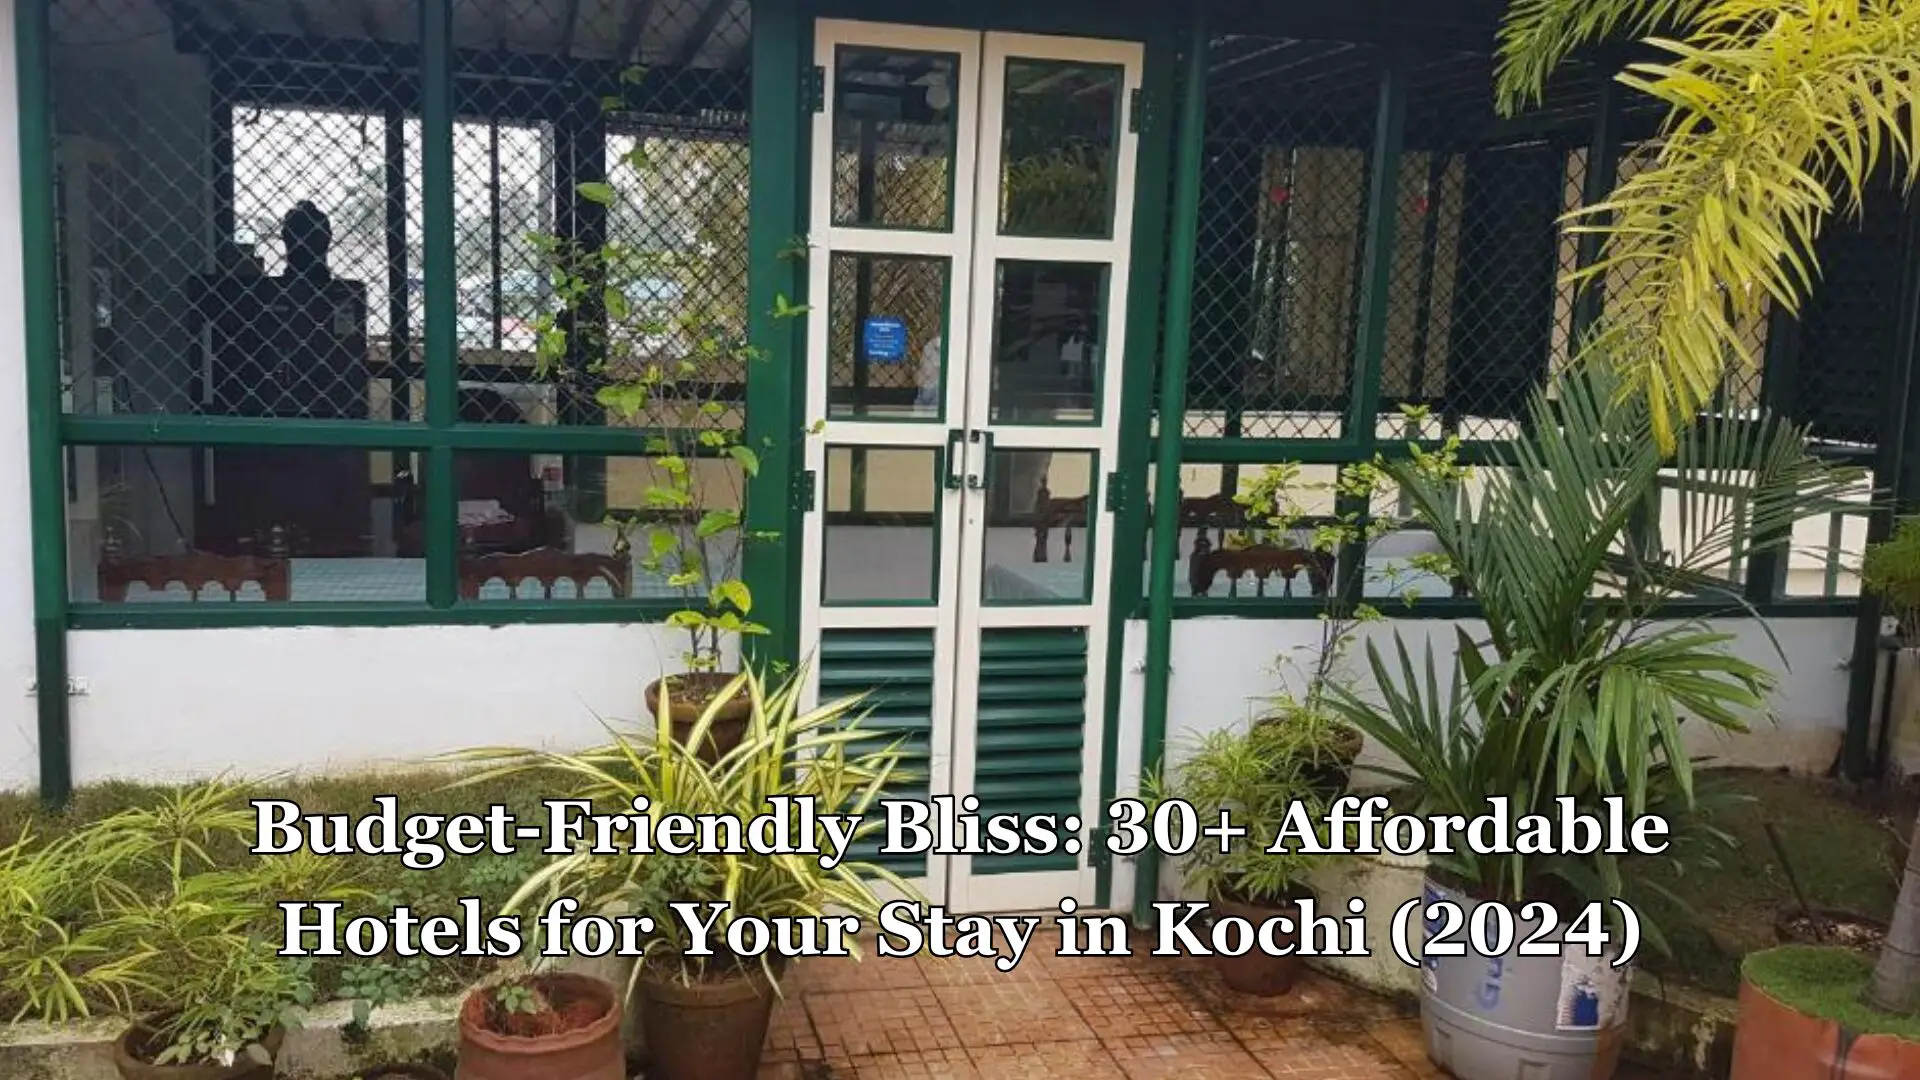 Budget-Friendly Bliss: 30+ Affordable Hotels for Your Stay in Kochi (2024)